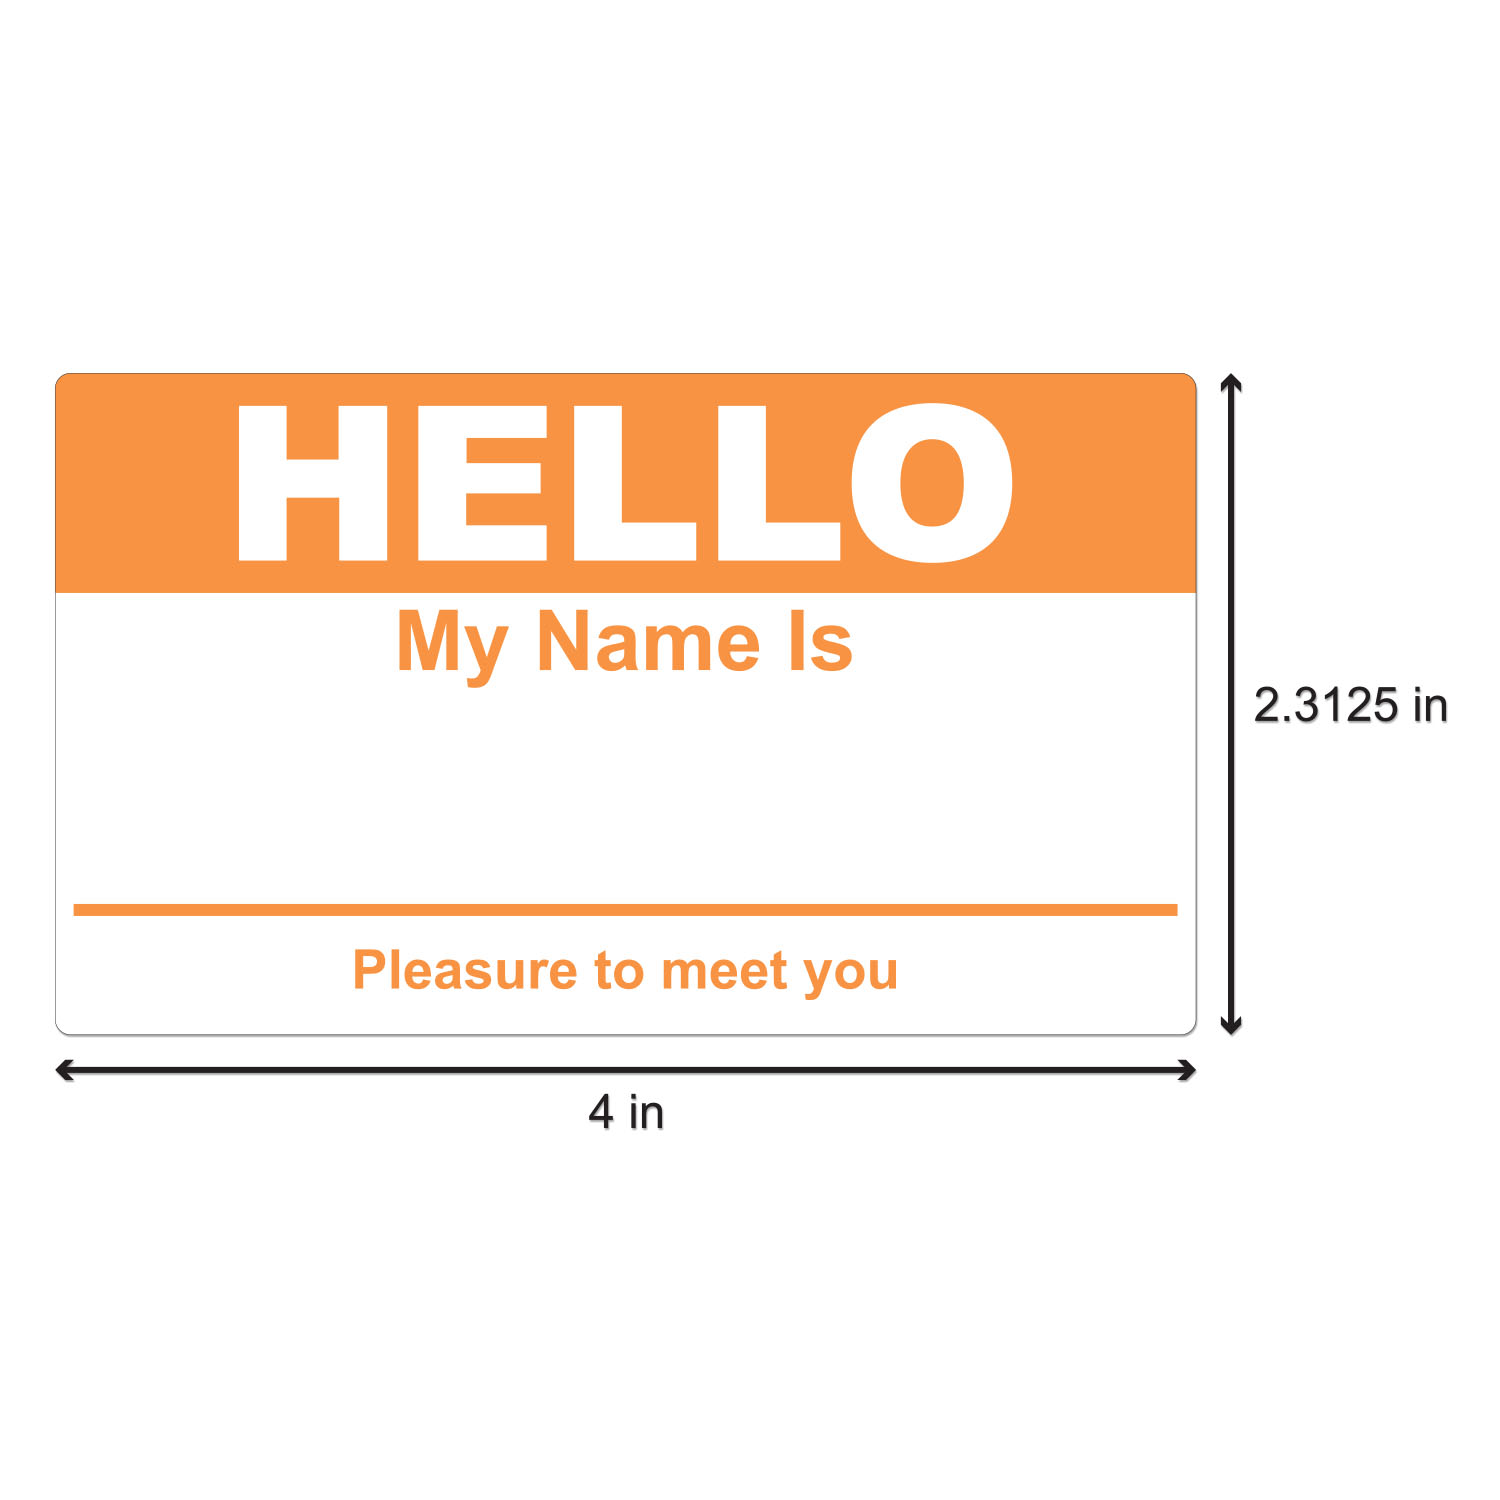 OfficeSmartLabels 4" x 2-5/16" Hello My Name is Labels Name Tag (Orange, 100 Labels per Roll) - image 1 of 2